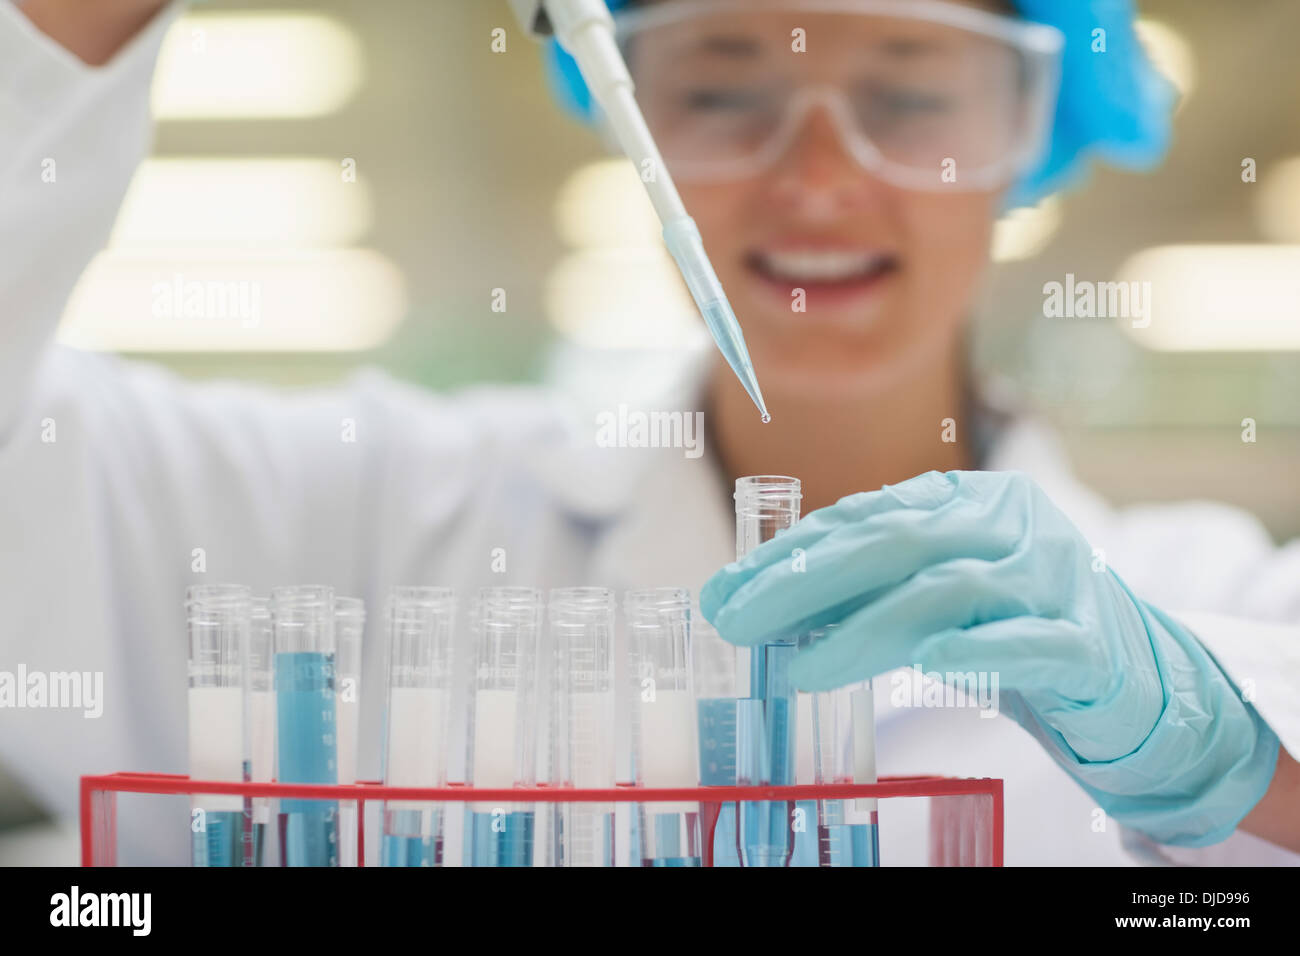 Smiling student using pipette holding test tube Banque D'Images